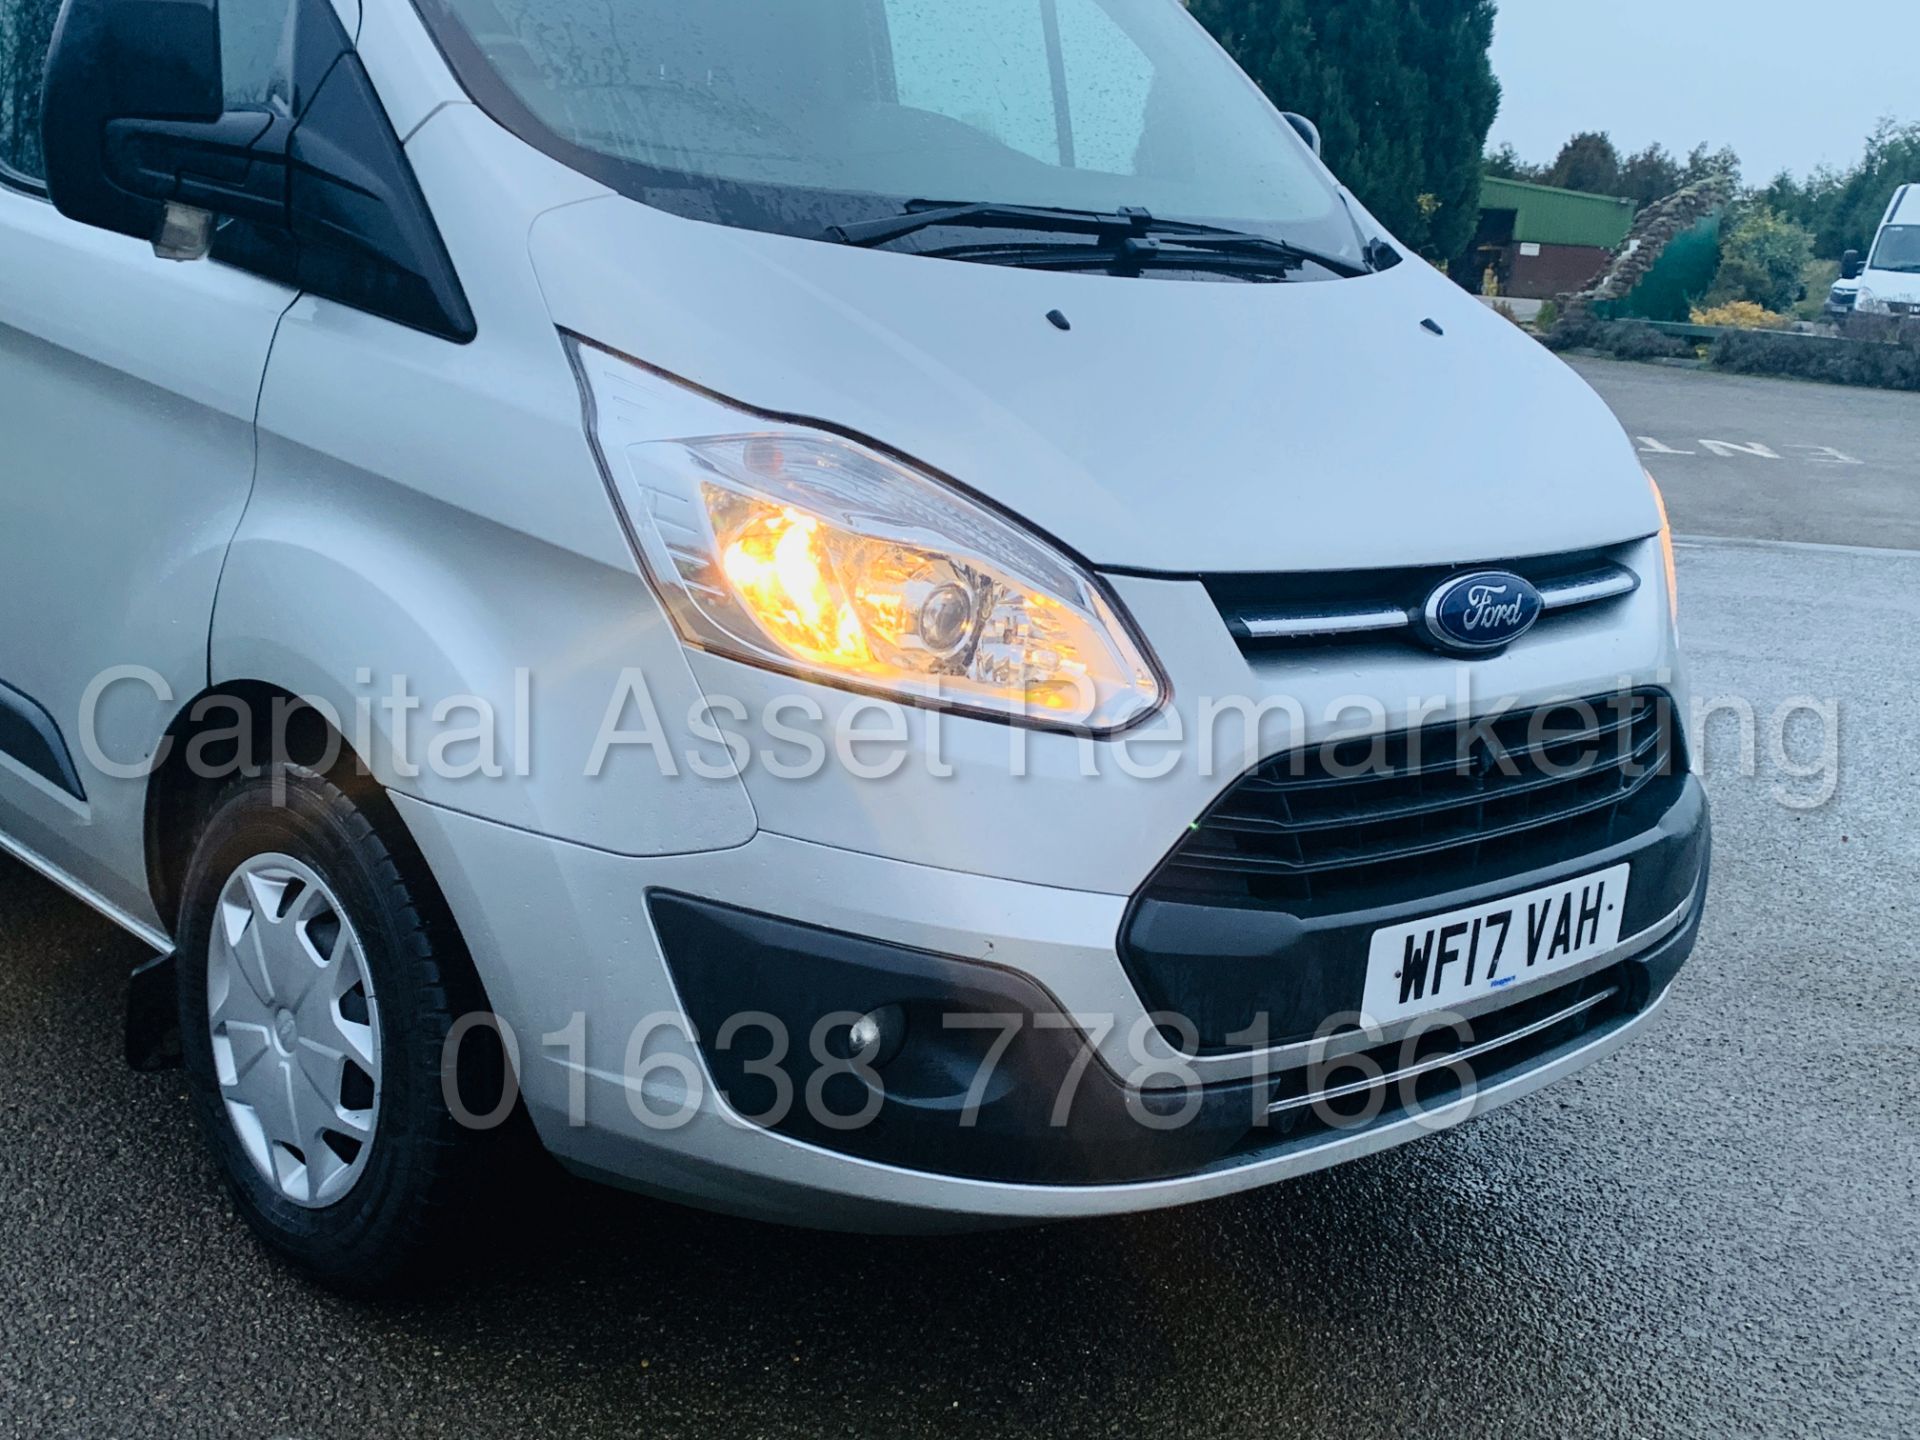 FORD TRANSIT *TREND EDITION* 290 SWB (2017 - EURO 6 / AD-BLUE) '2.0 TDCI - 130 BHP - 6 SPEED' - Image 13 of 41